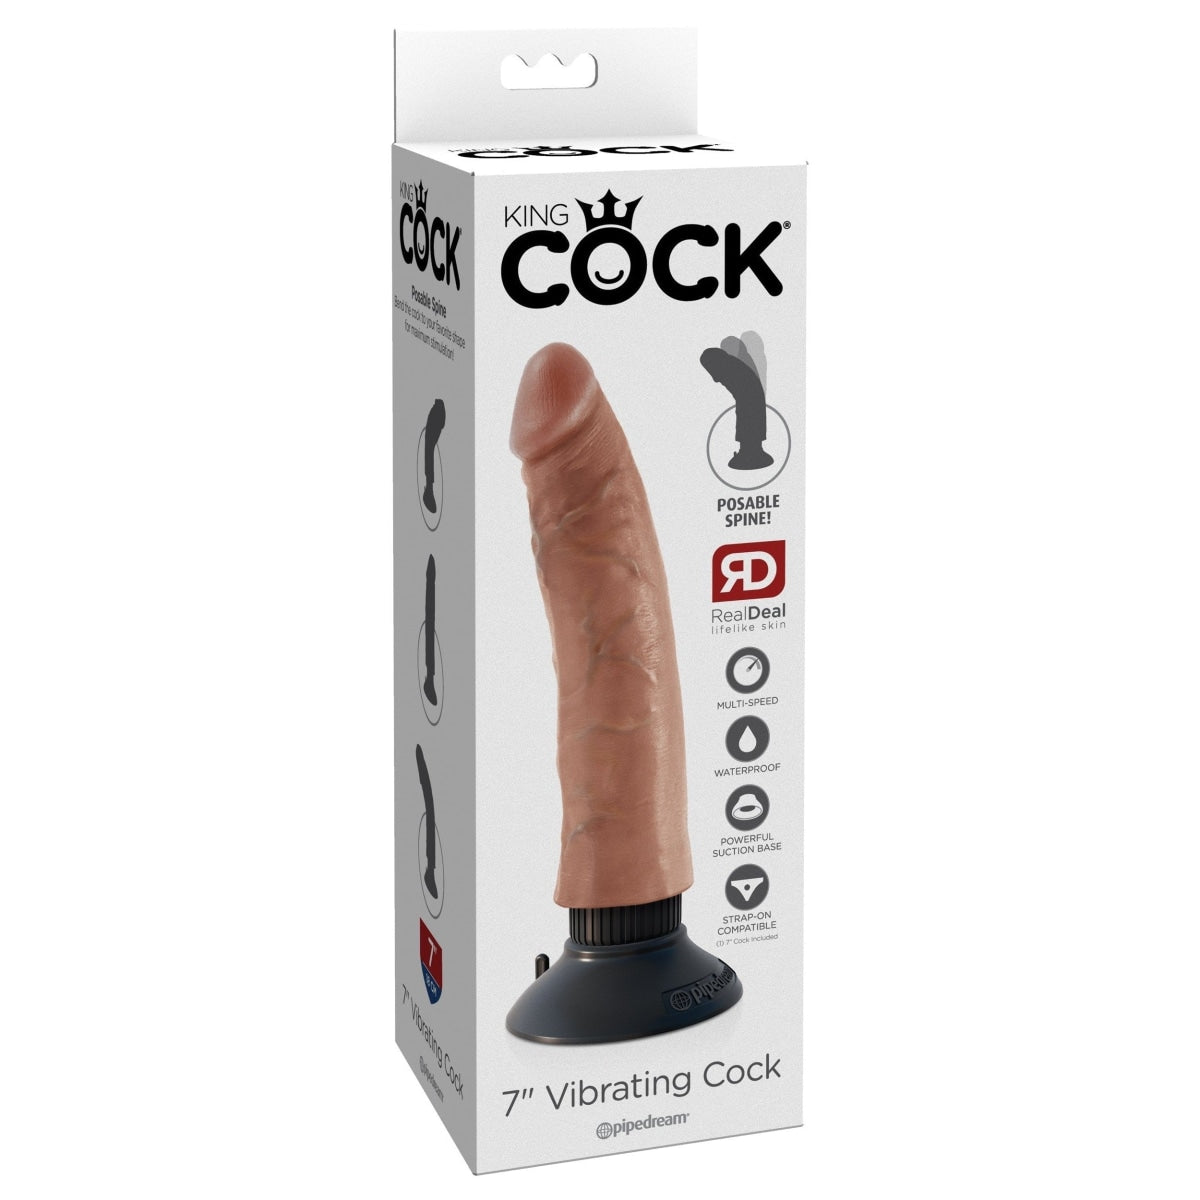 King Cock 7 In Vibrating Tan Intimates Adult Boutique